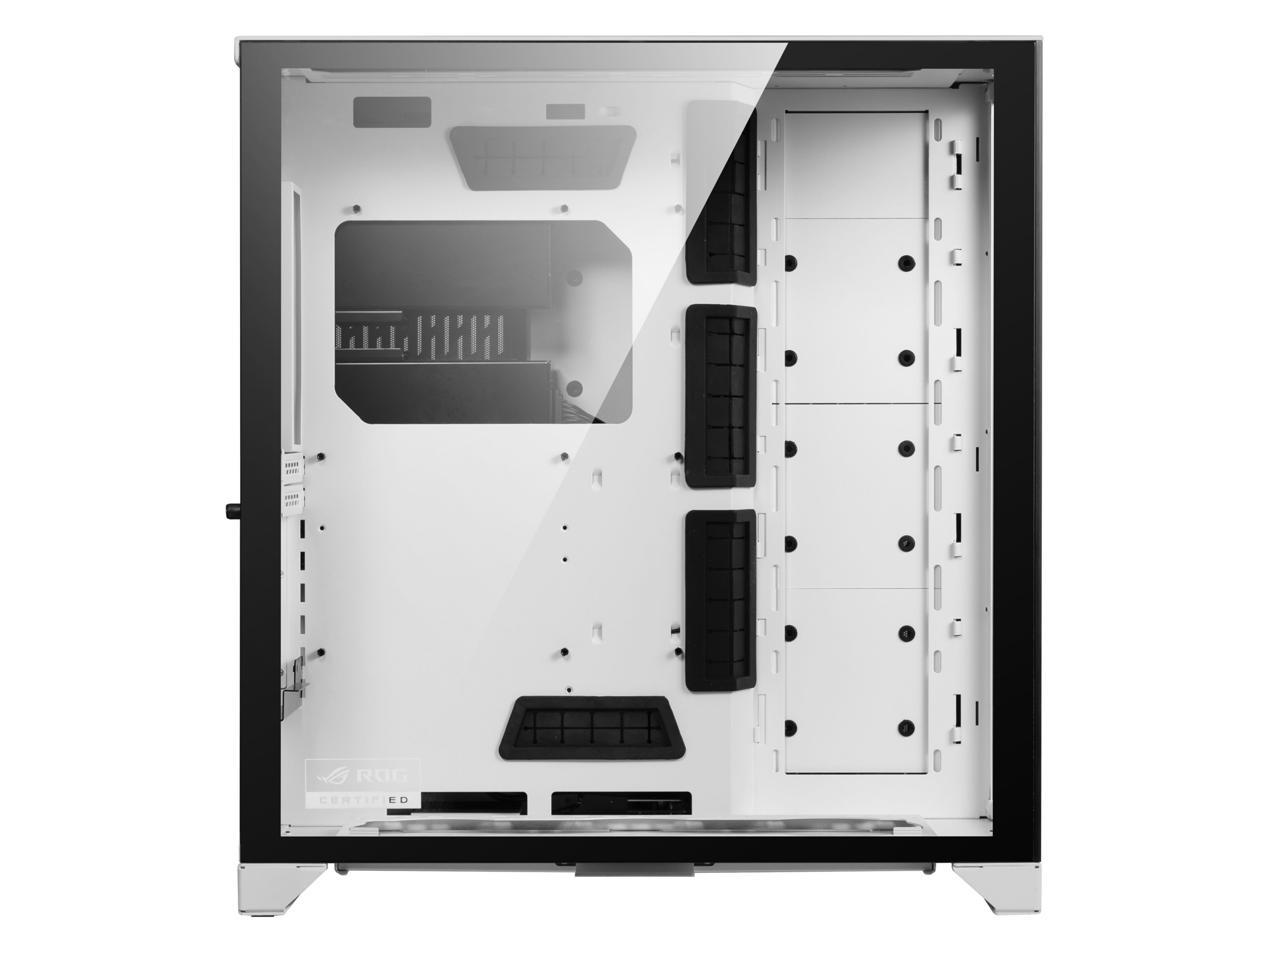 LIAN LI O11 Dynamic XL ROG Certificated - White Color - Tempered Glass on the Front, and Left Side - E-ATX, ATX Full Tower Gaming Computer Case - O11D XL-W